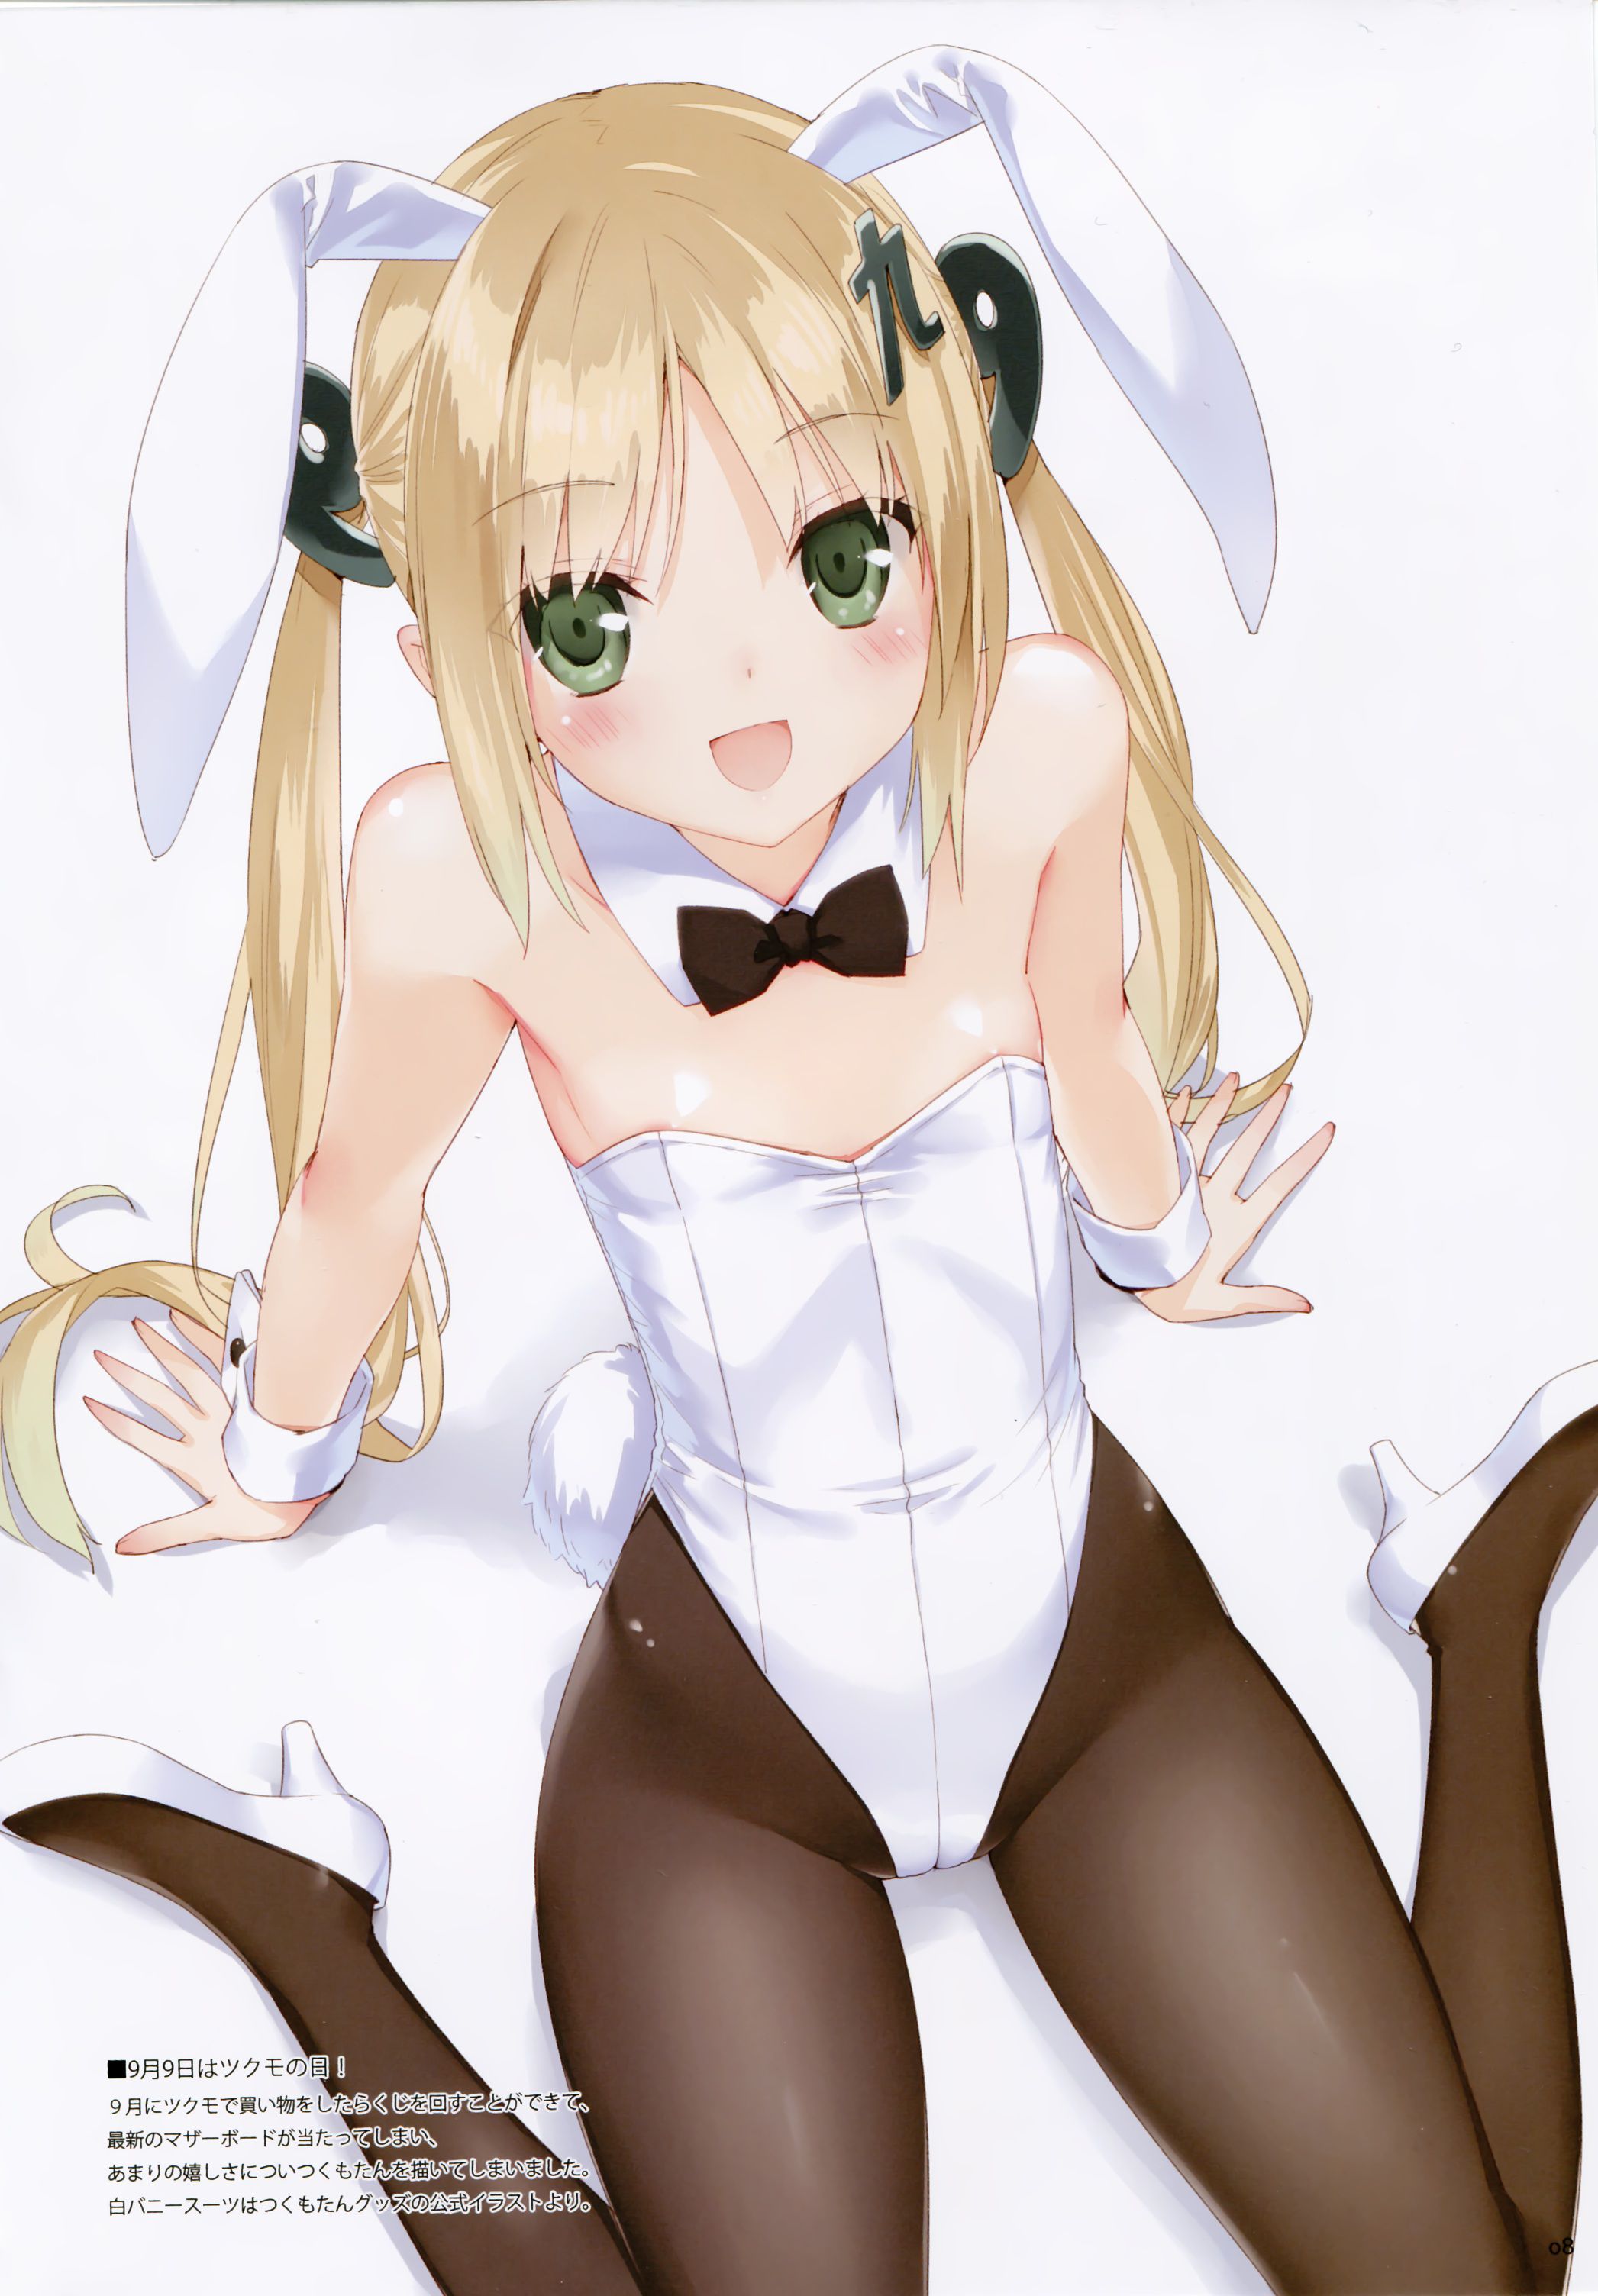 Elo Elo I want entertainment and Bunny girl daughter secondary image (; ° ∀ °) = 3 Mulher 15